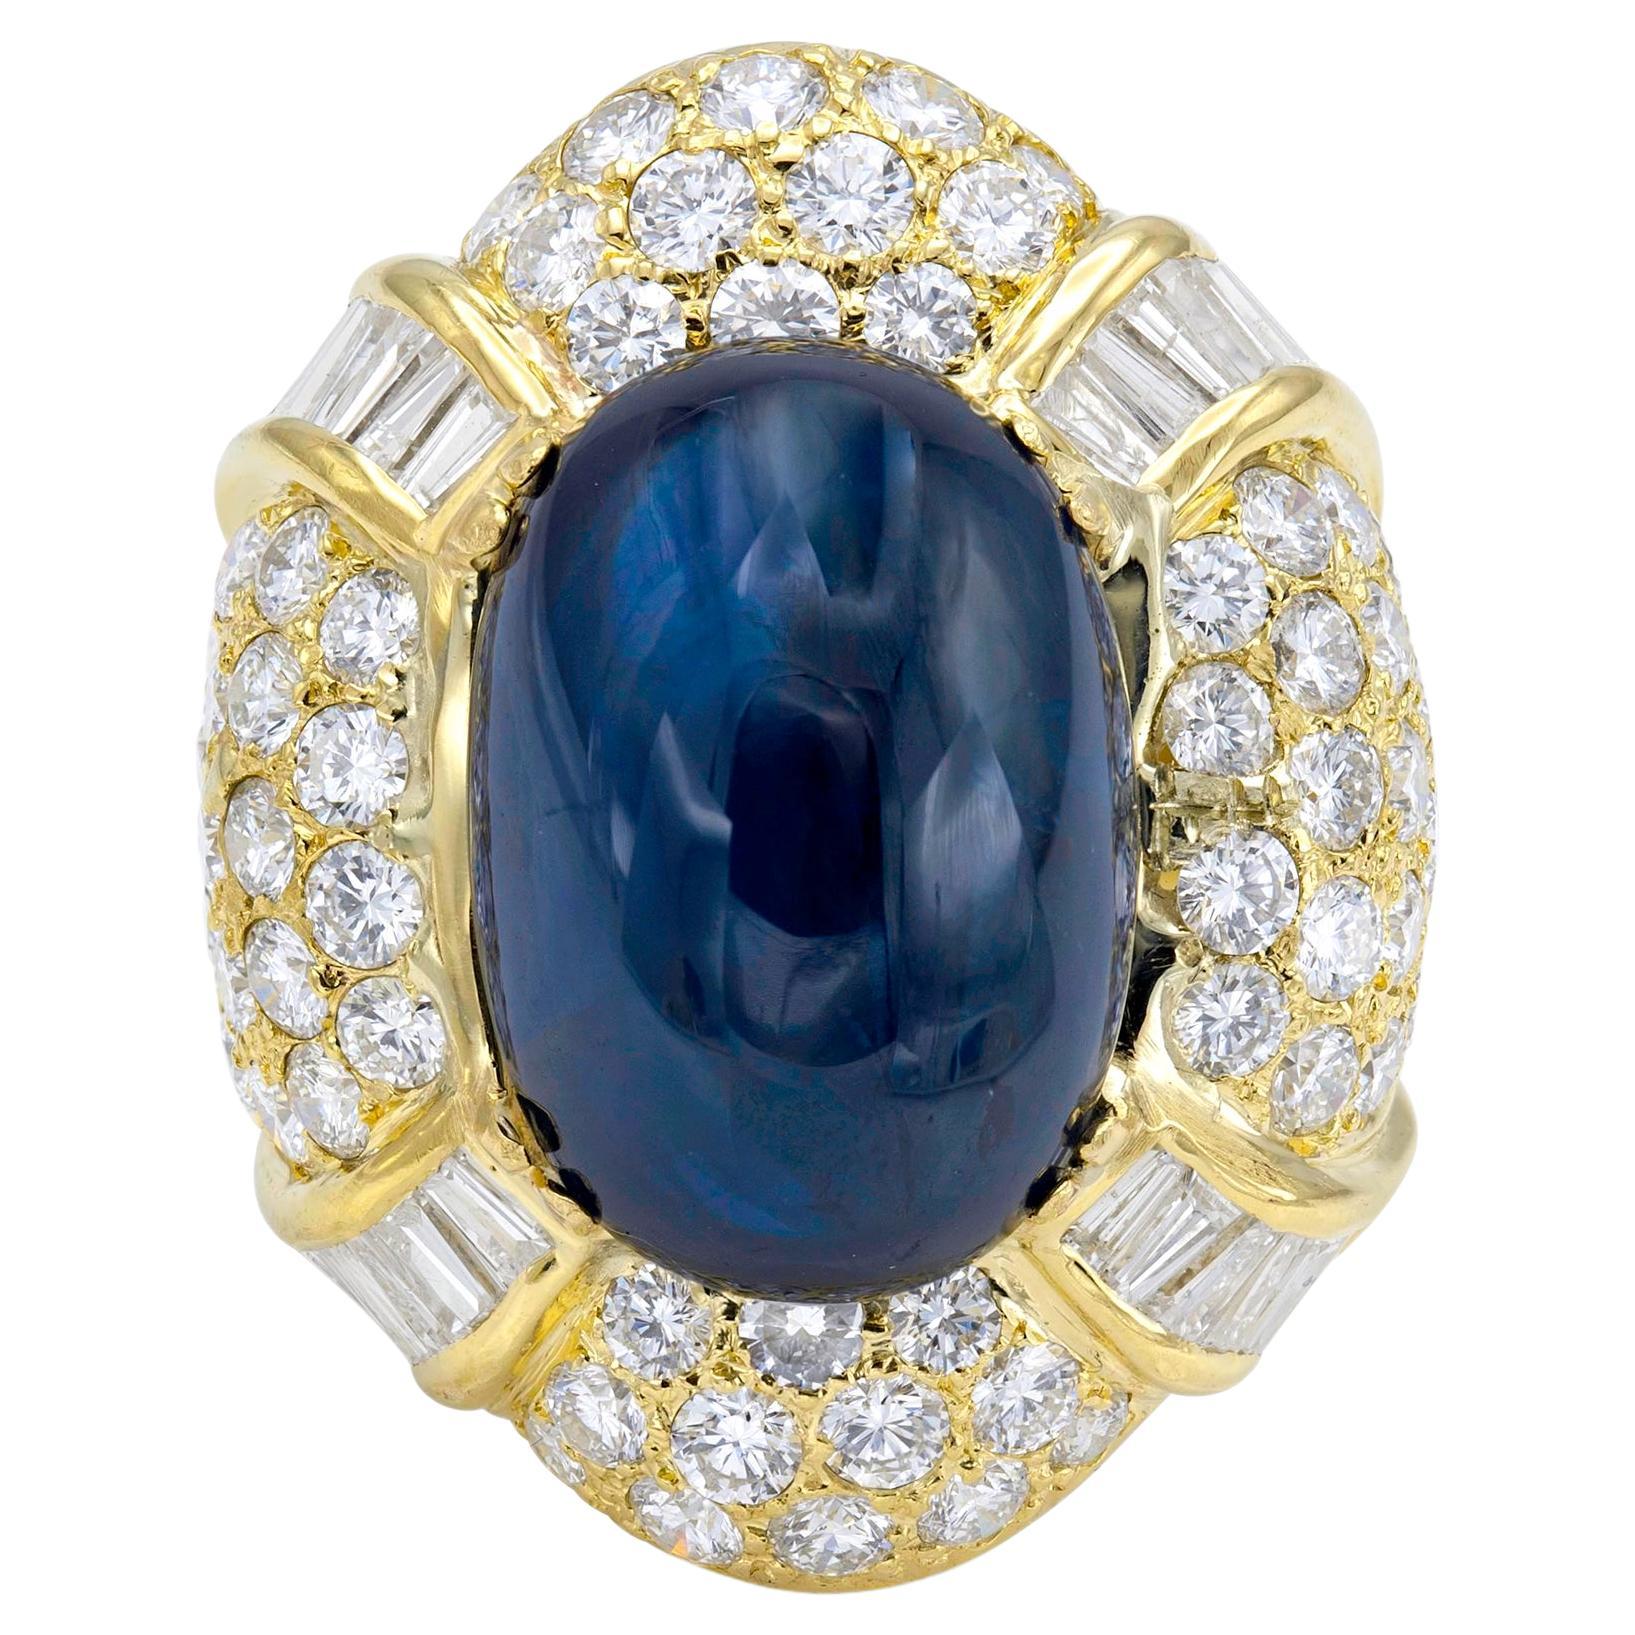 22.79 Carat Cabochon Sapphire Cocktail Ring with Diamonds